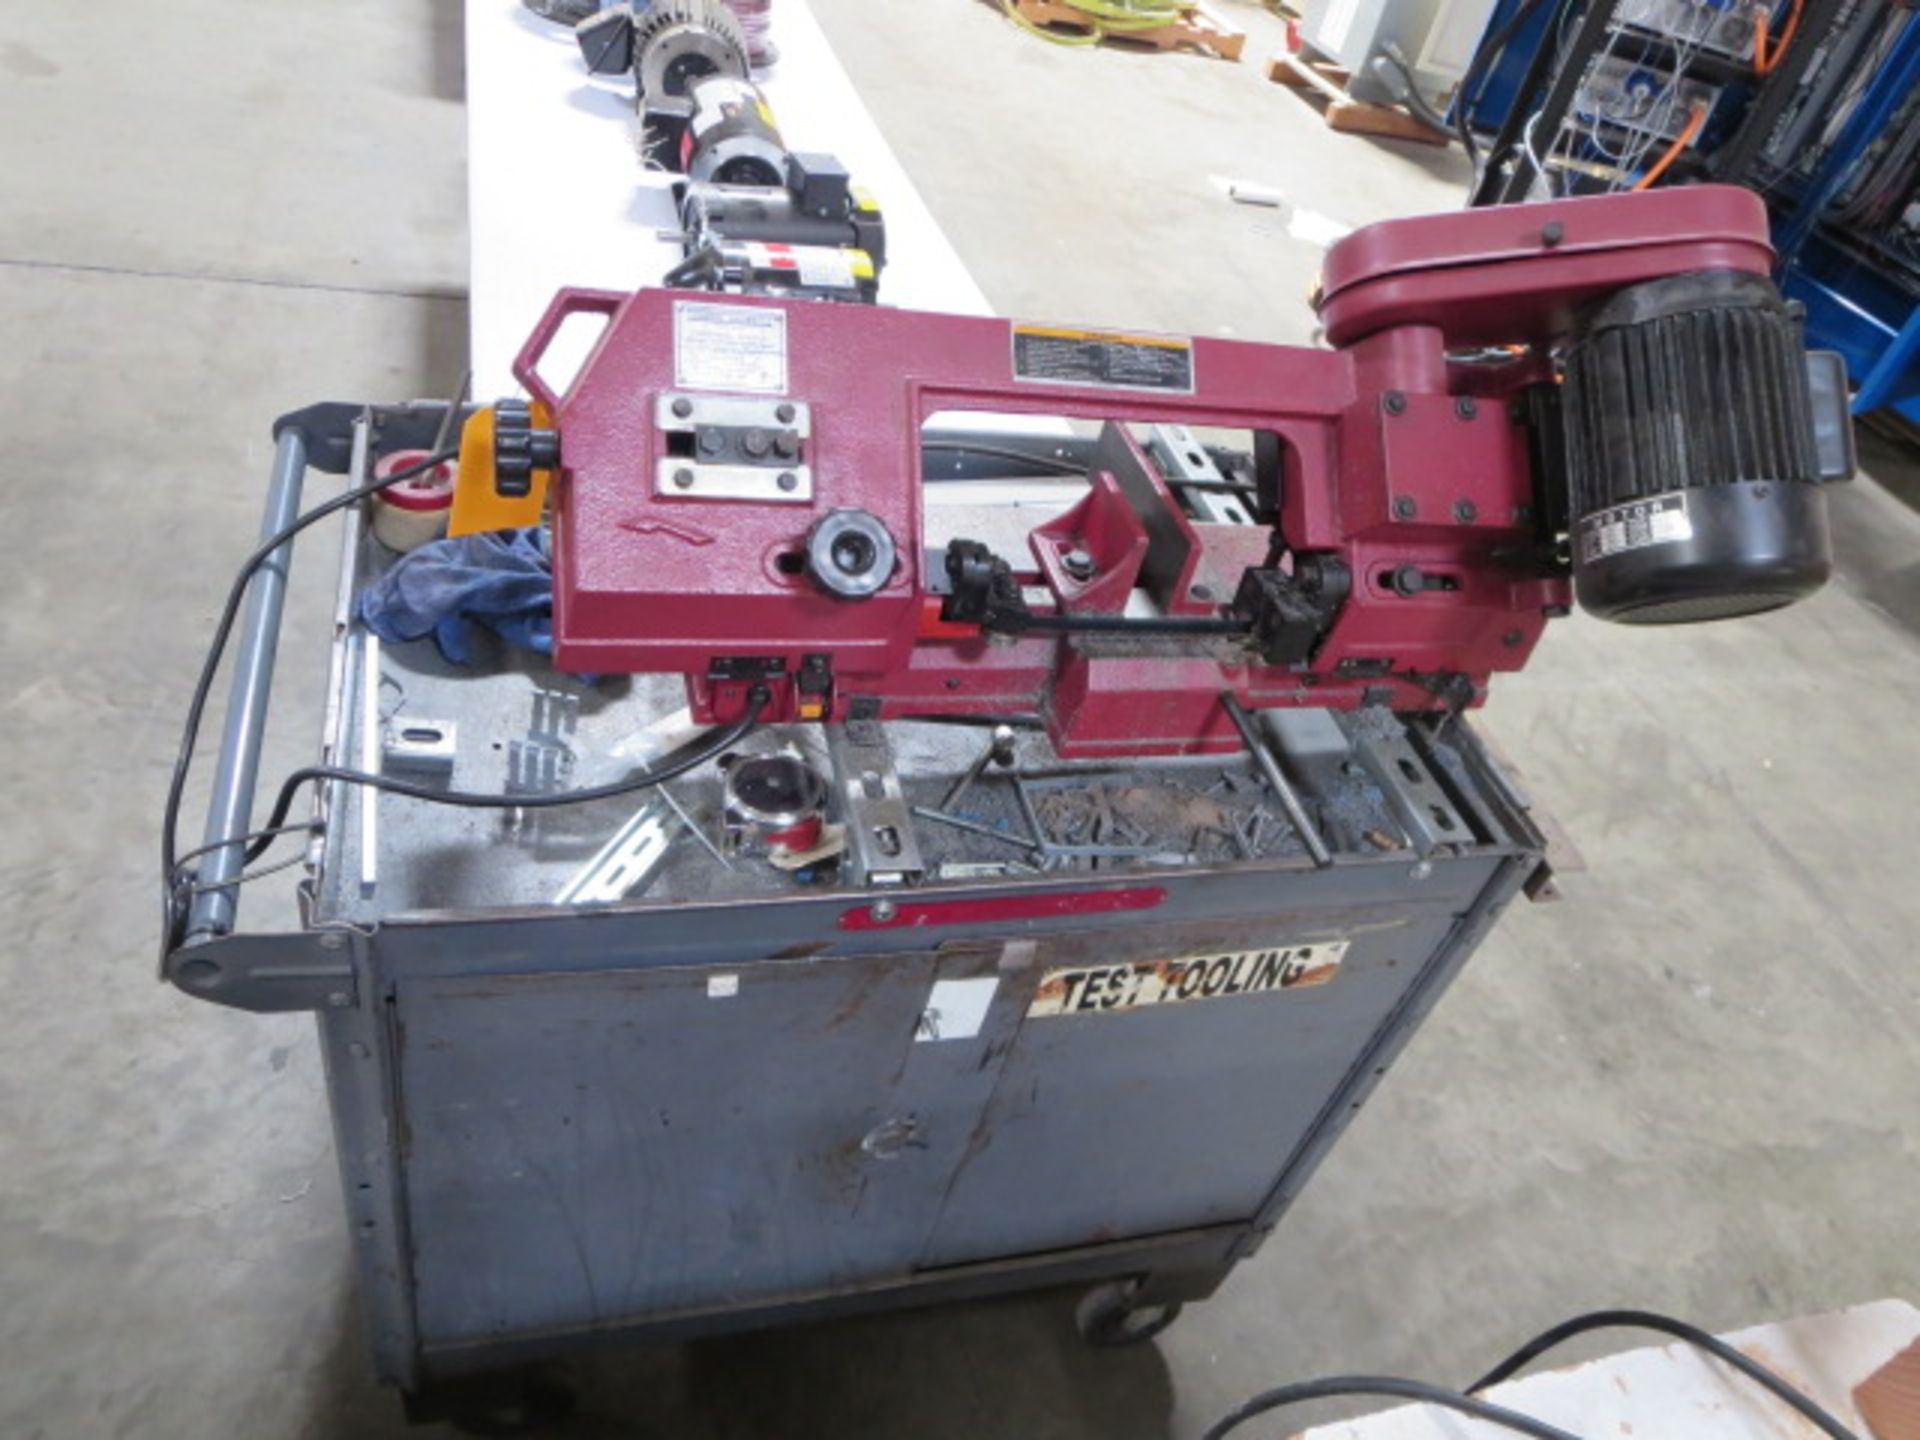 Central Machinery Horizontal/Vertical Metal Cutting Band Saw, model 93762, Includes Rolling Cart